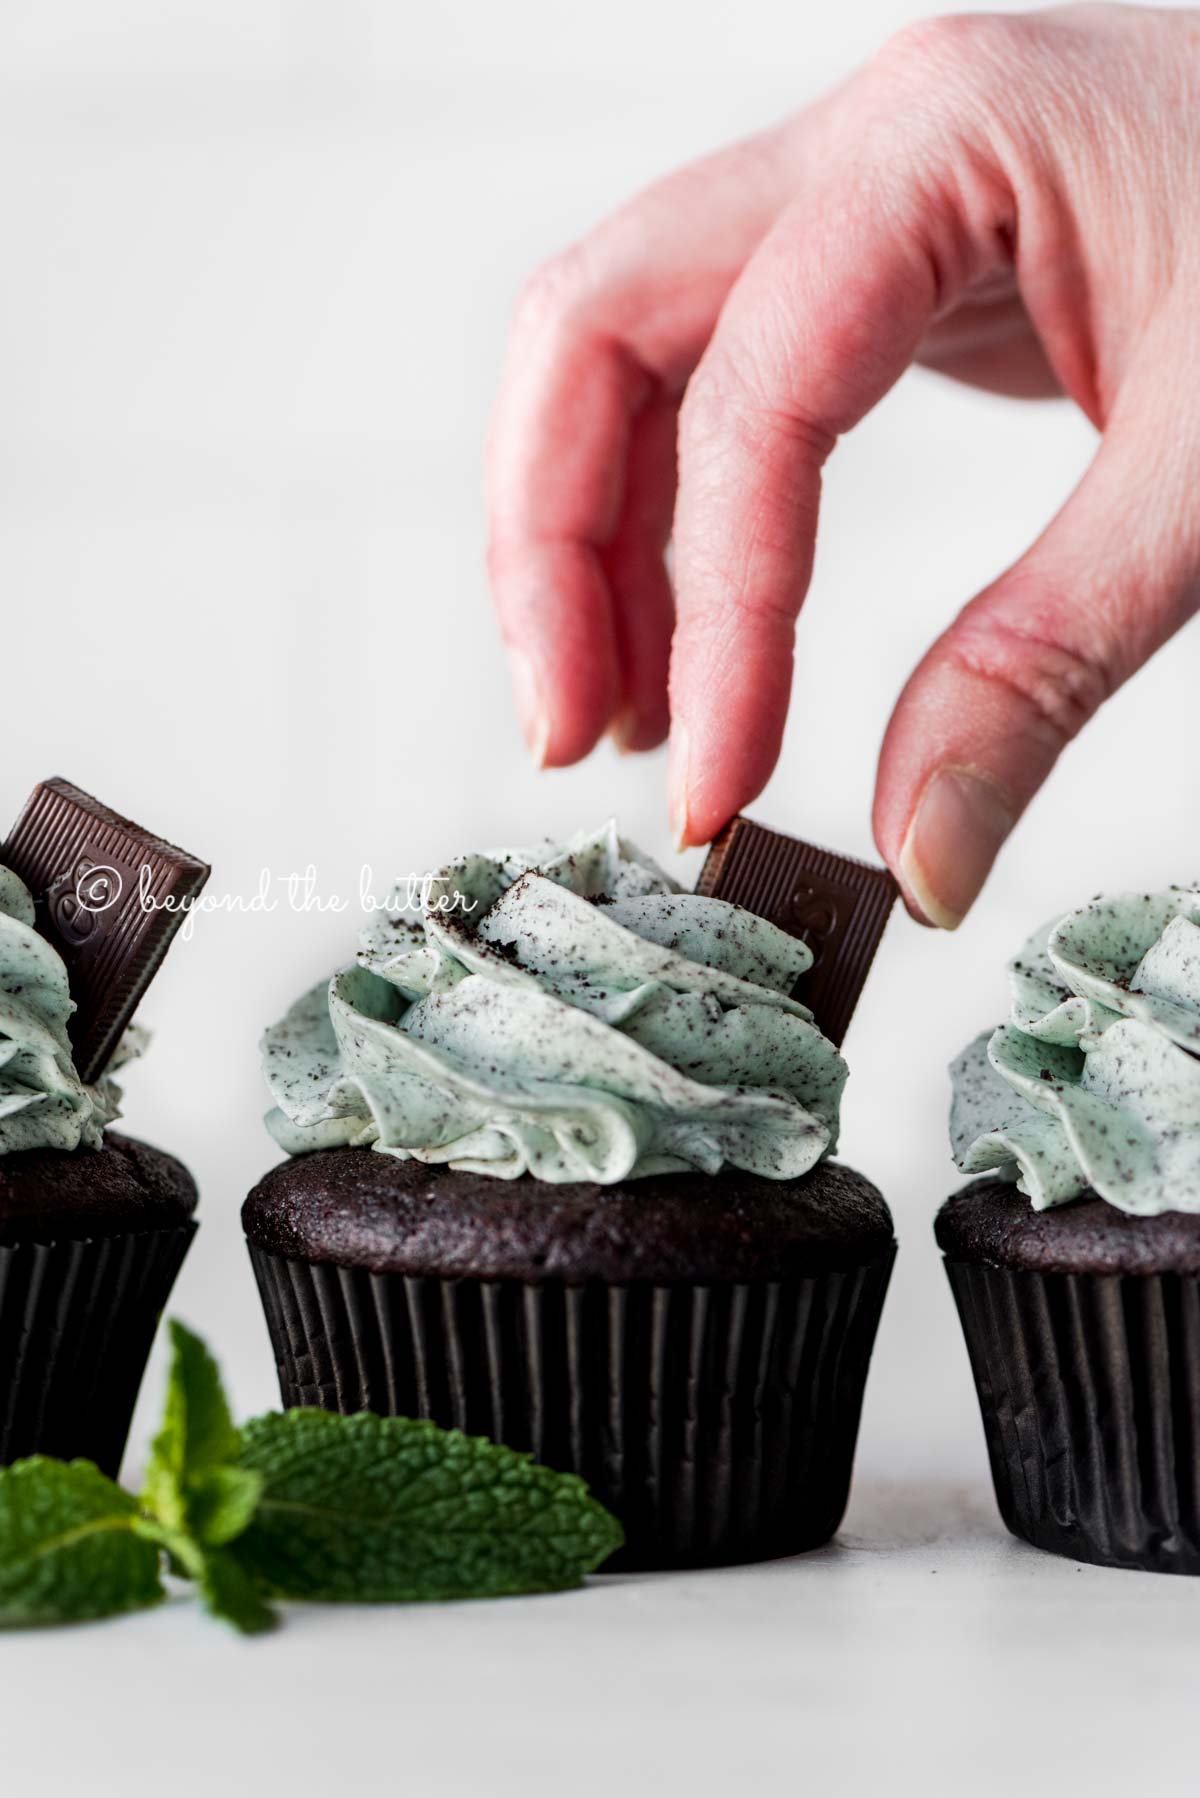 Placing an Andes mint on top of a mint chocolate cupcake for garnish | All Images © Beyond the Butter®